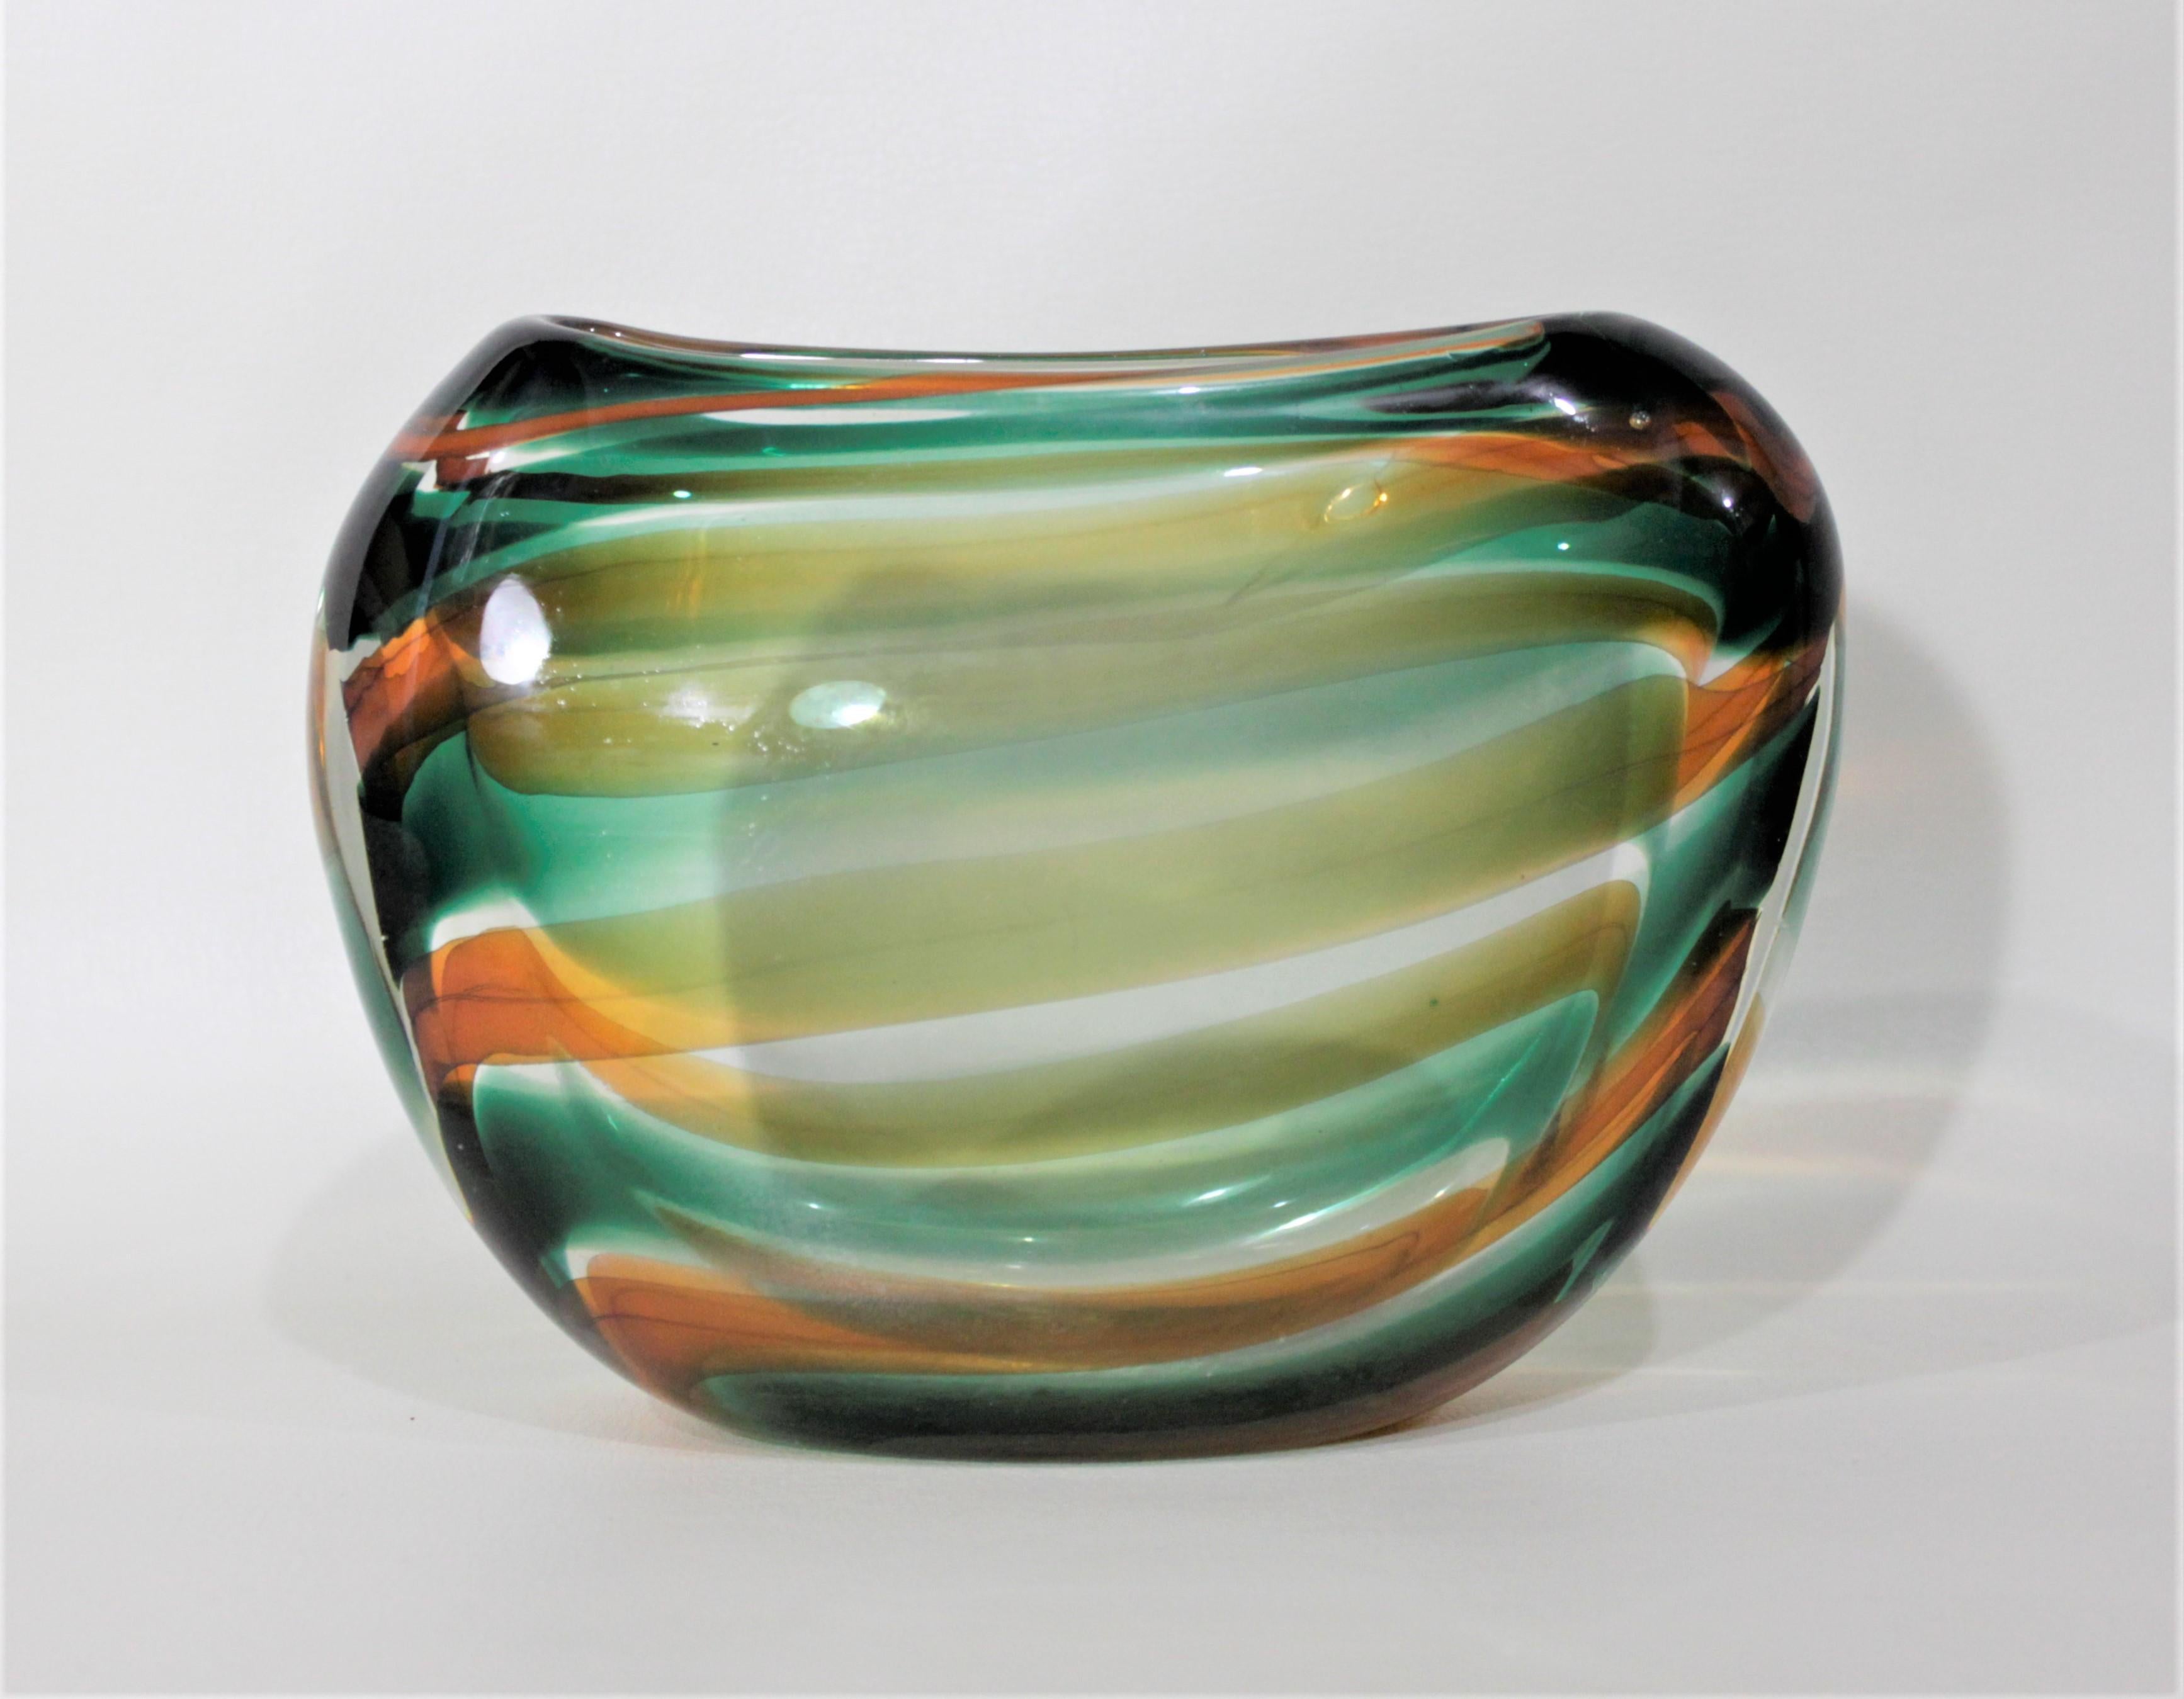 This Mid-Century Modern art glass vase was produced by the Leerdam Unica glass factory during the 1960s and although unsigned, can be attributed to the works of Floris Meydam The vase has very sleek lines and is done in vertical swirling stripes of